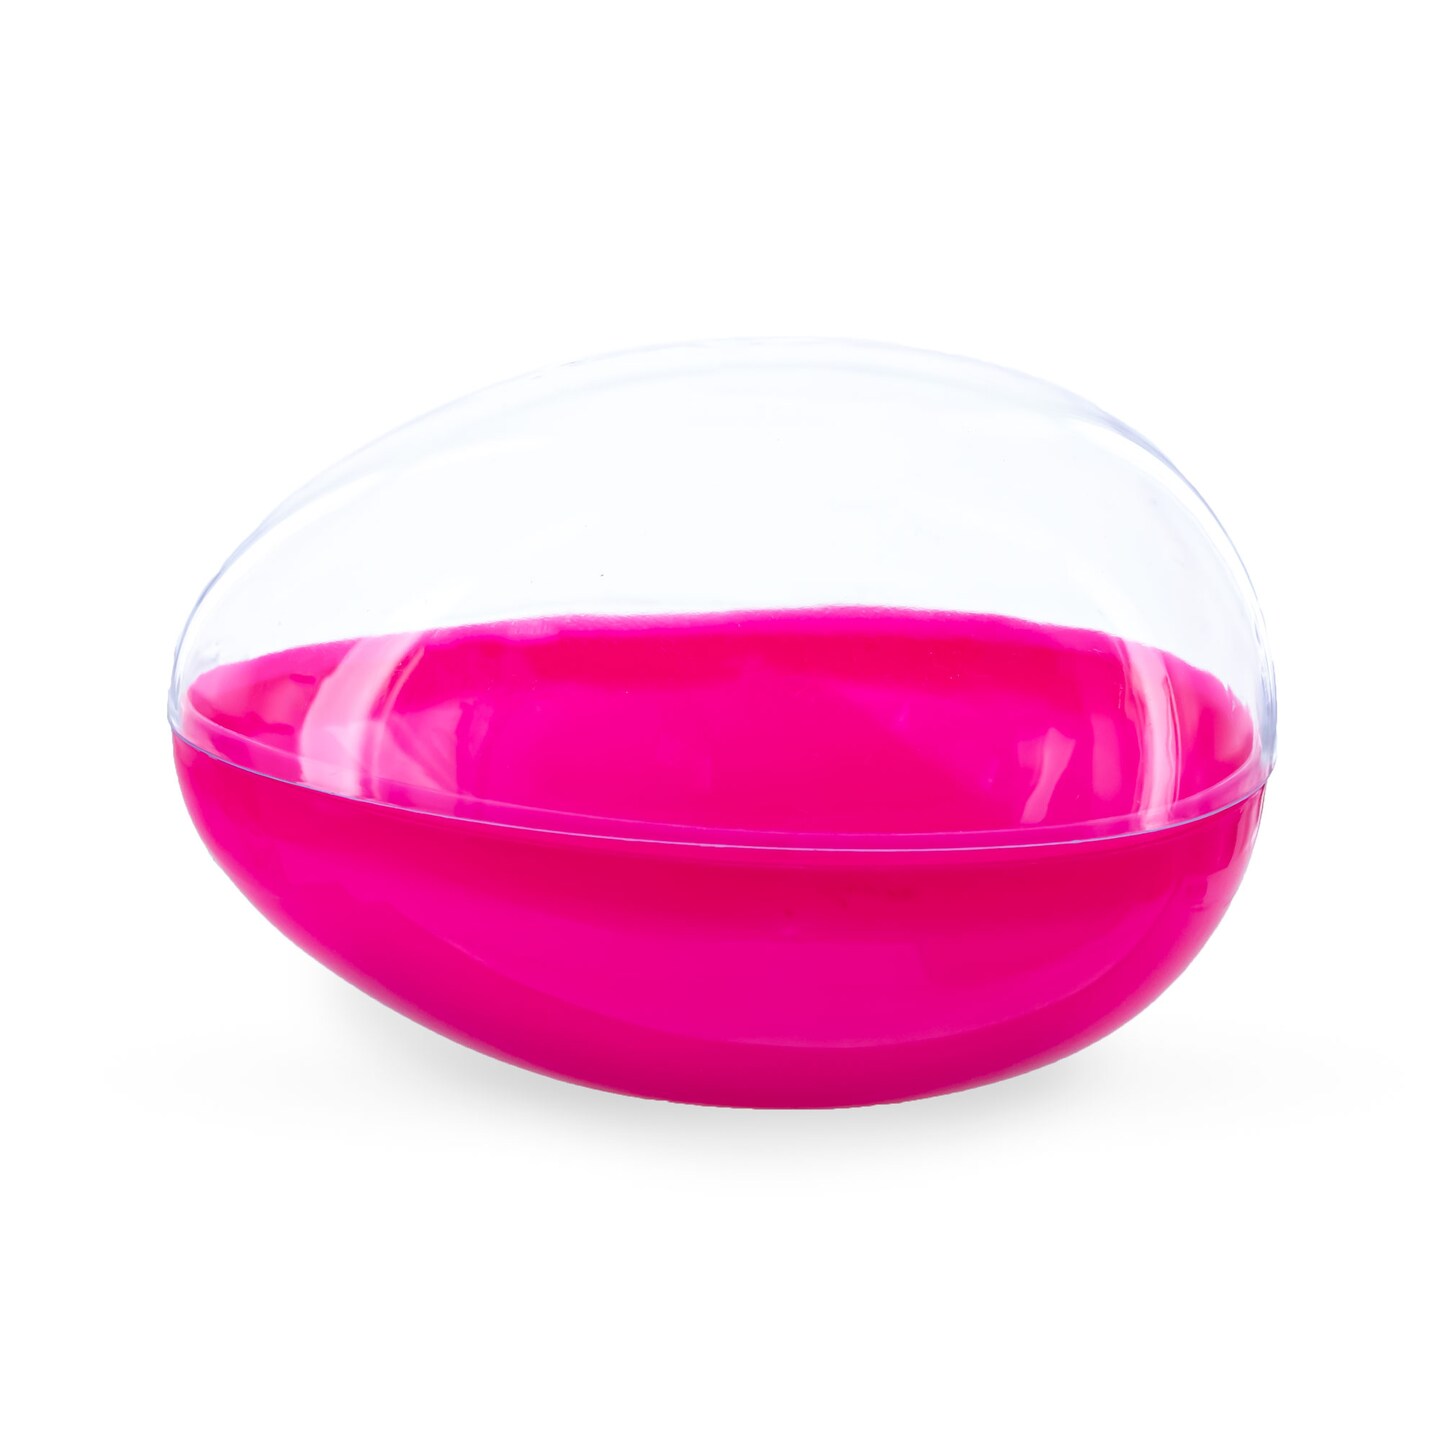 Large Fillable Clear Top Pink Bottom Plastic Easter Egg 5.1 Inches